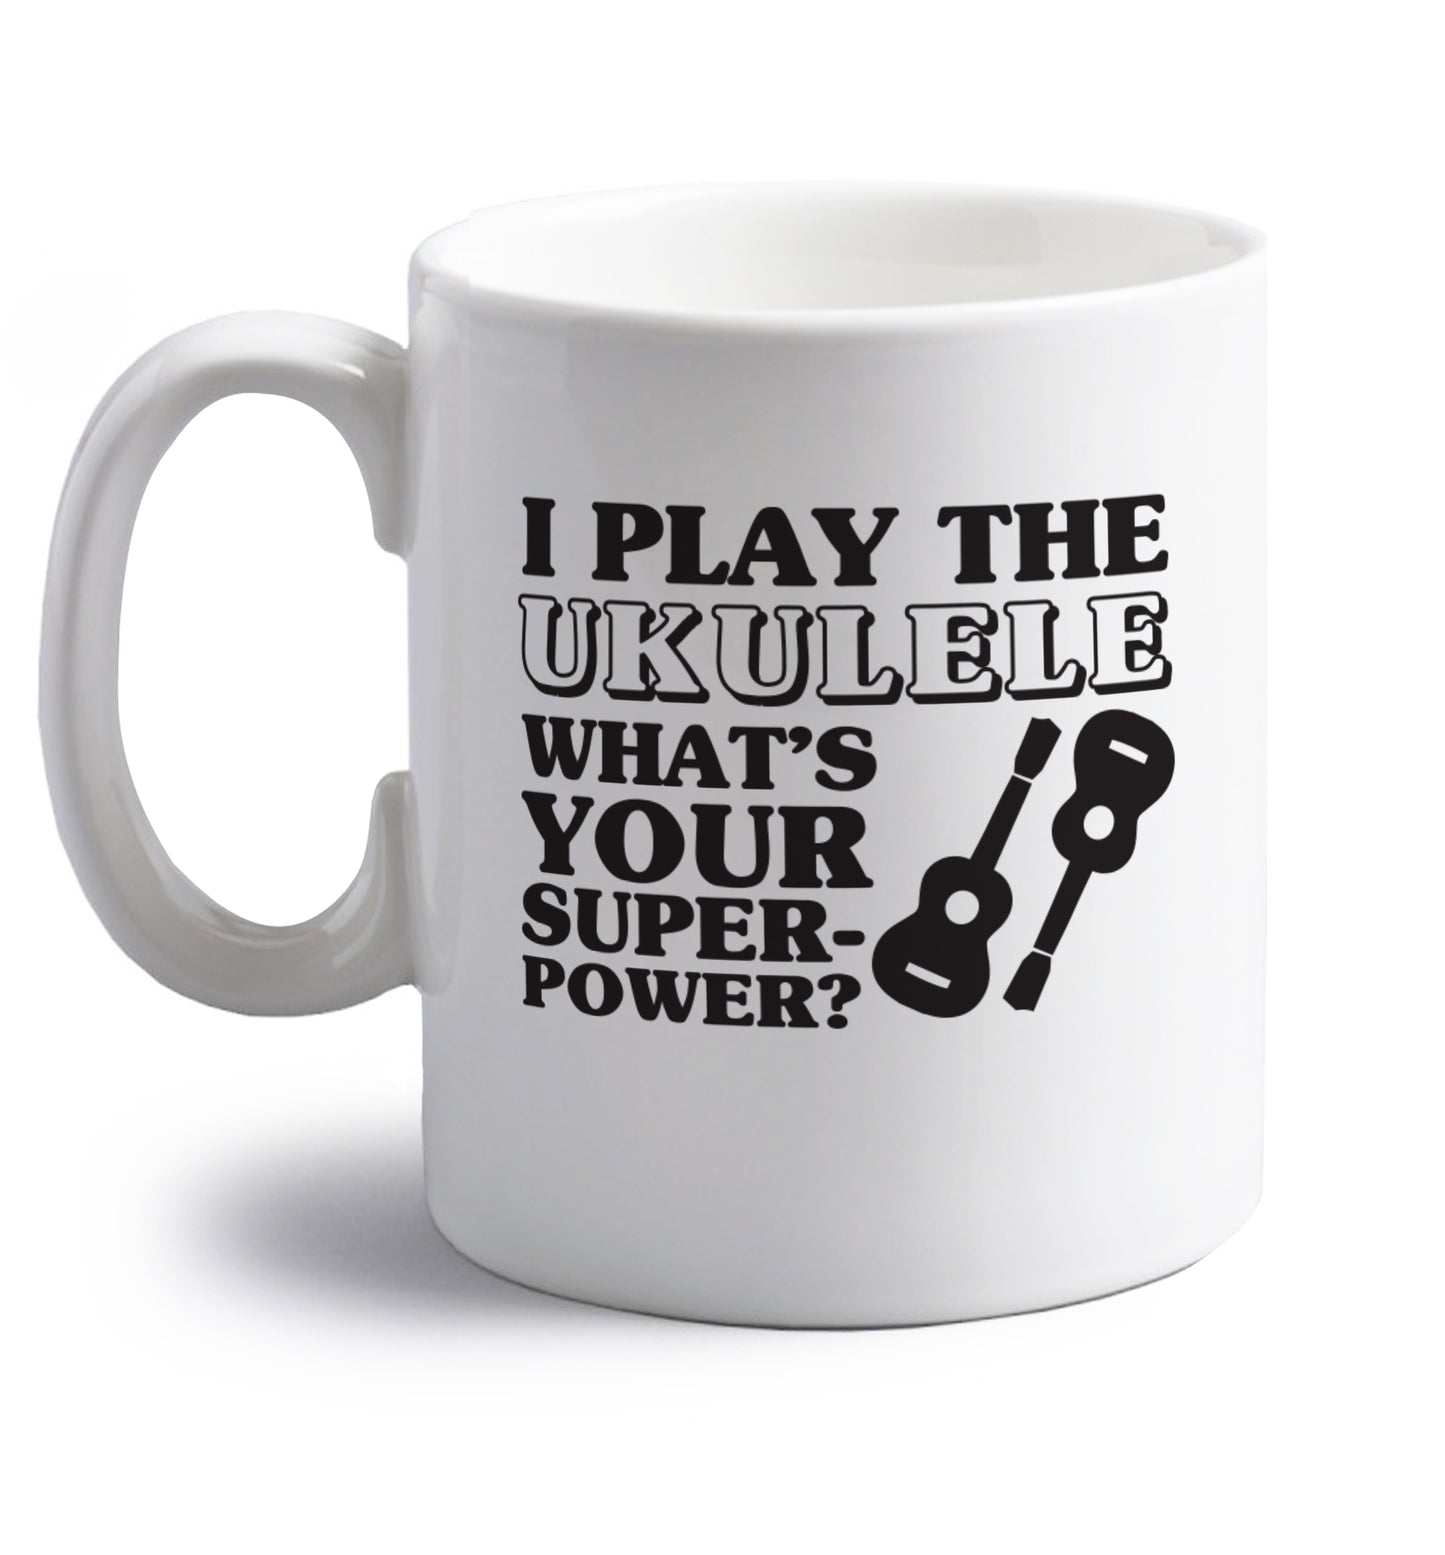 I play the ukulele what's your superpower? right handed white ceramic mug 